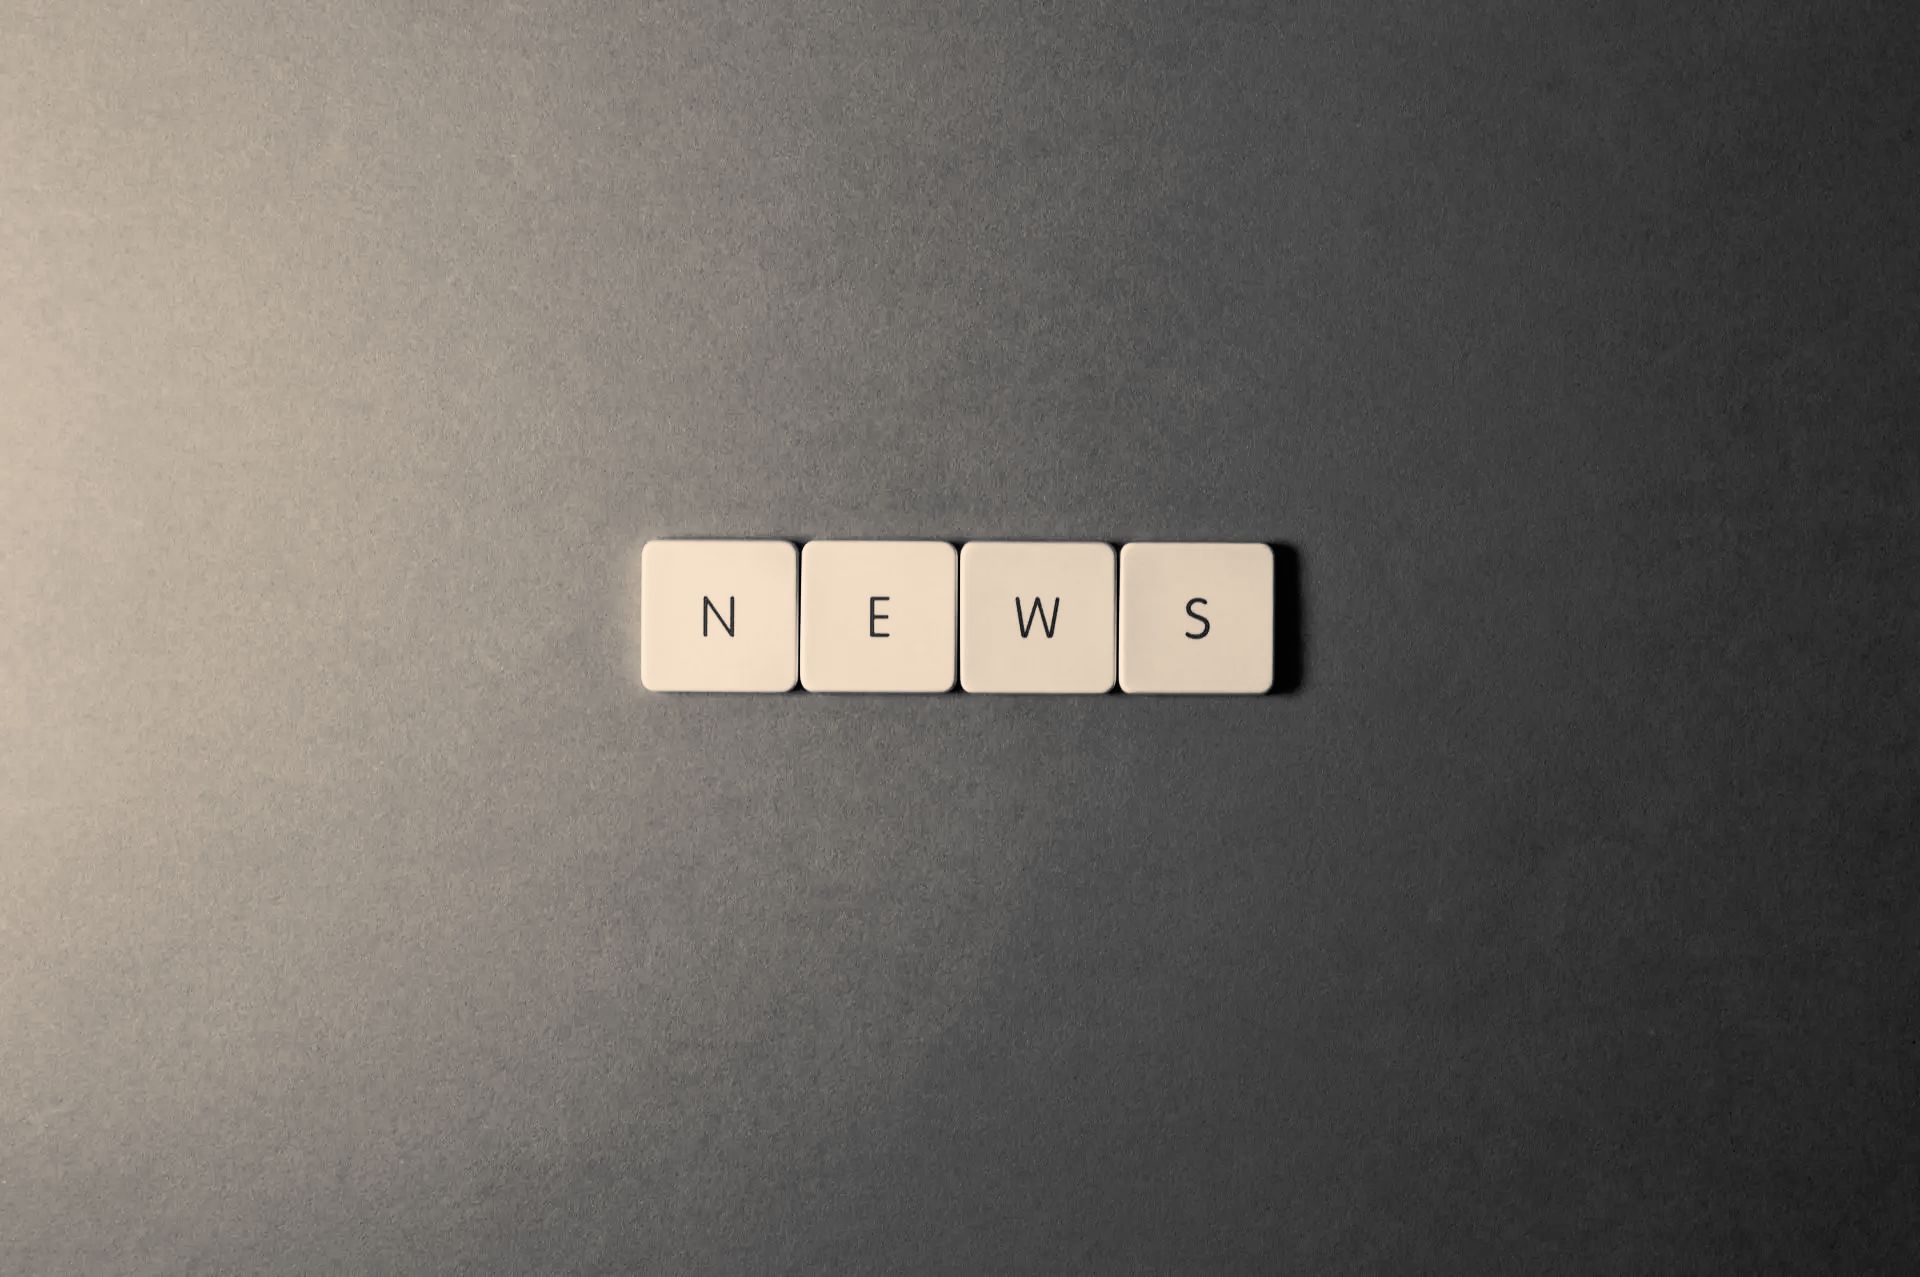 Accounting News For Redlands, CA CPA news scrabble tiles that spell NEWS